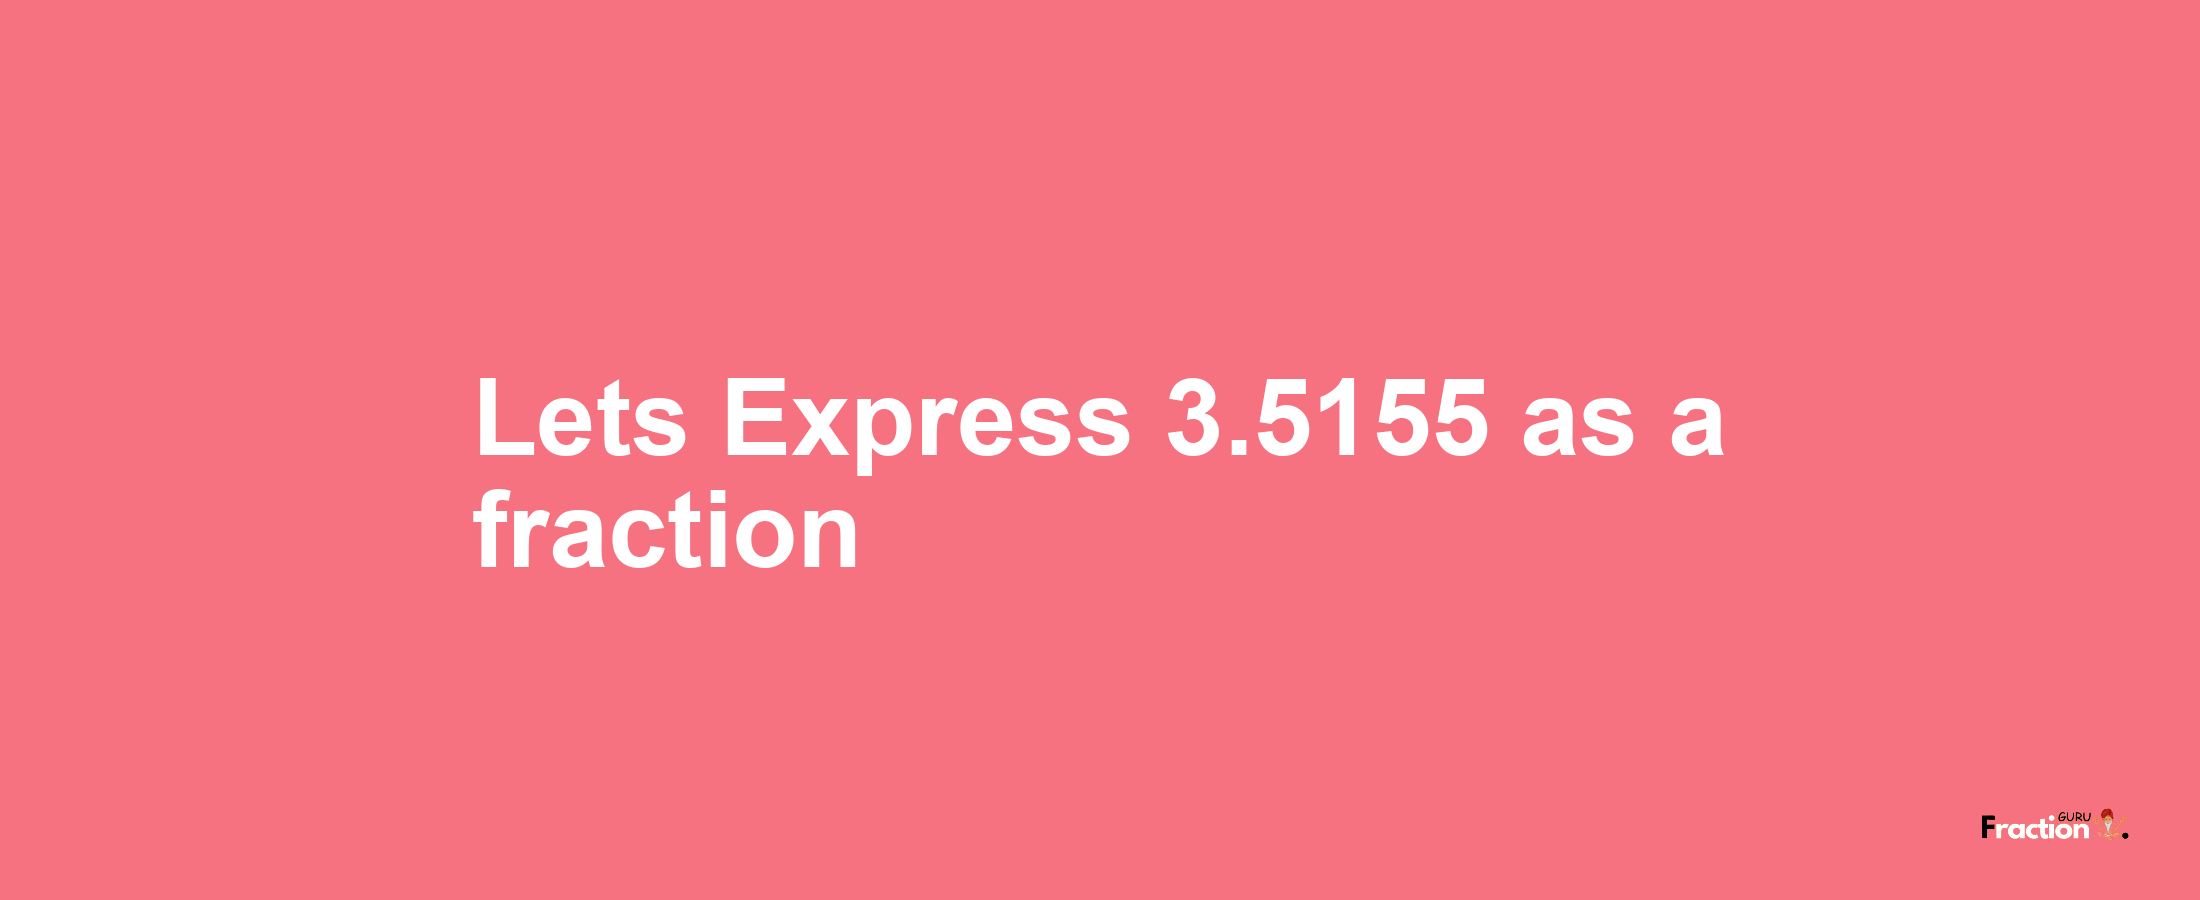 Lets Express 3.5155 as afraction